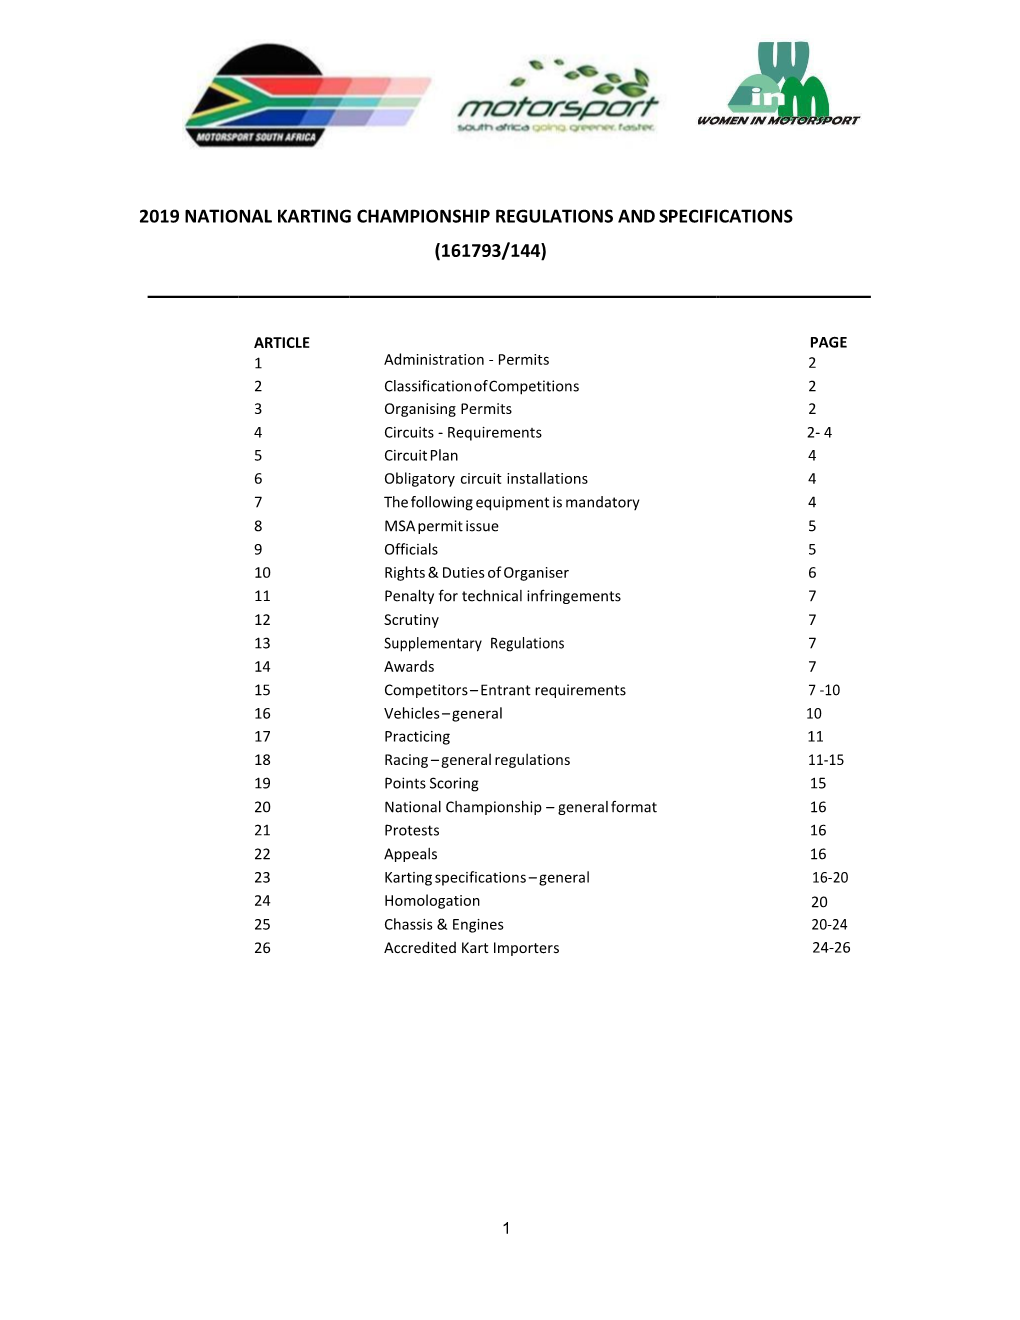 2019 National Karting Championship Regulations and Specifications (161793/144)